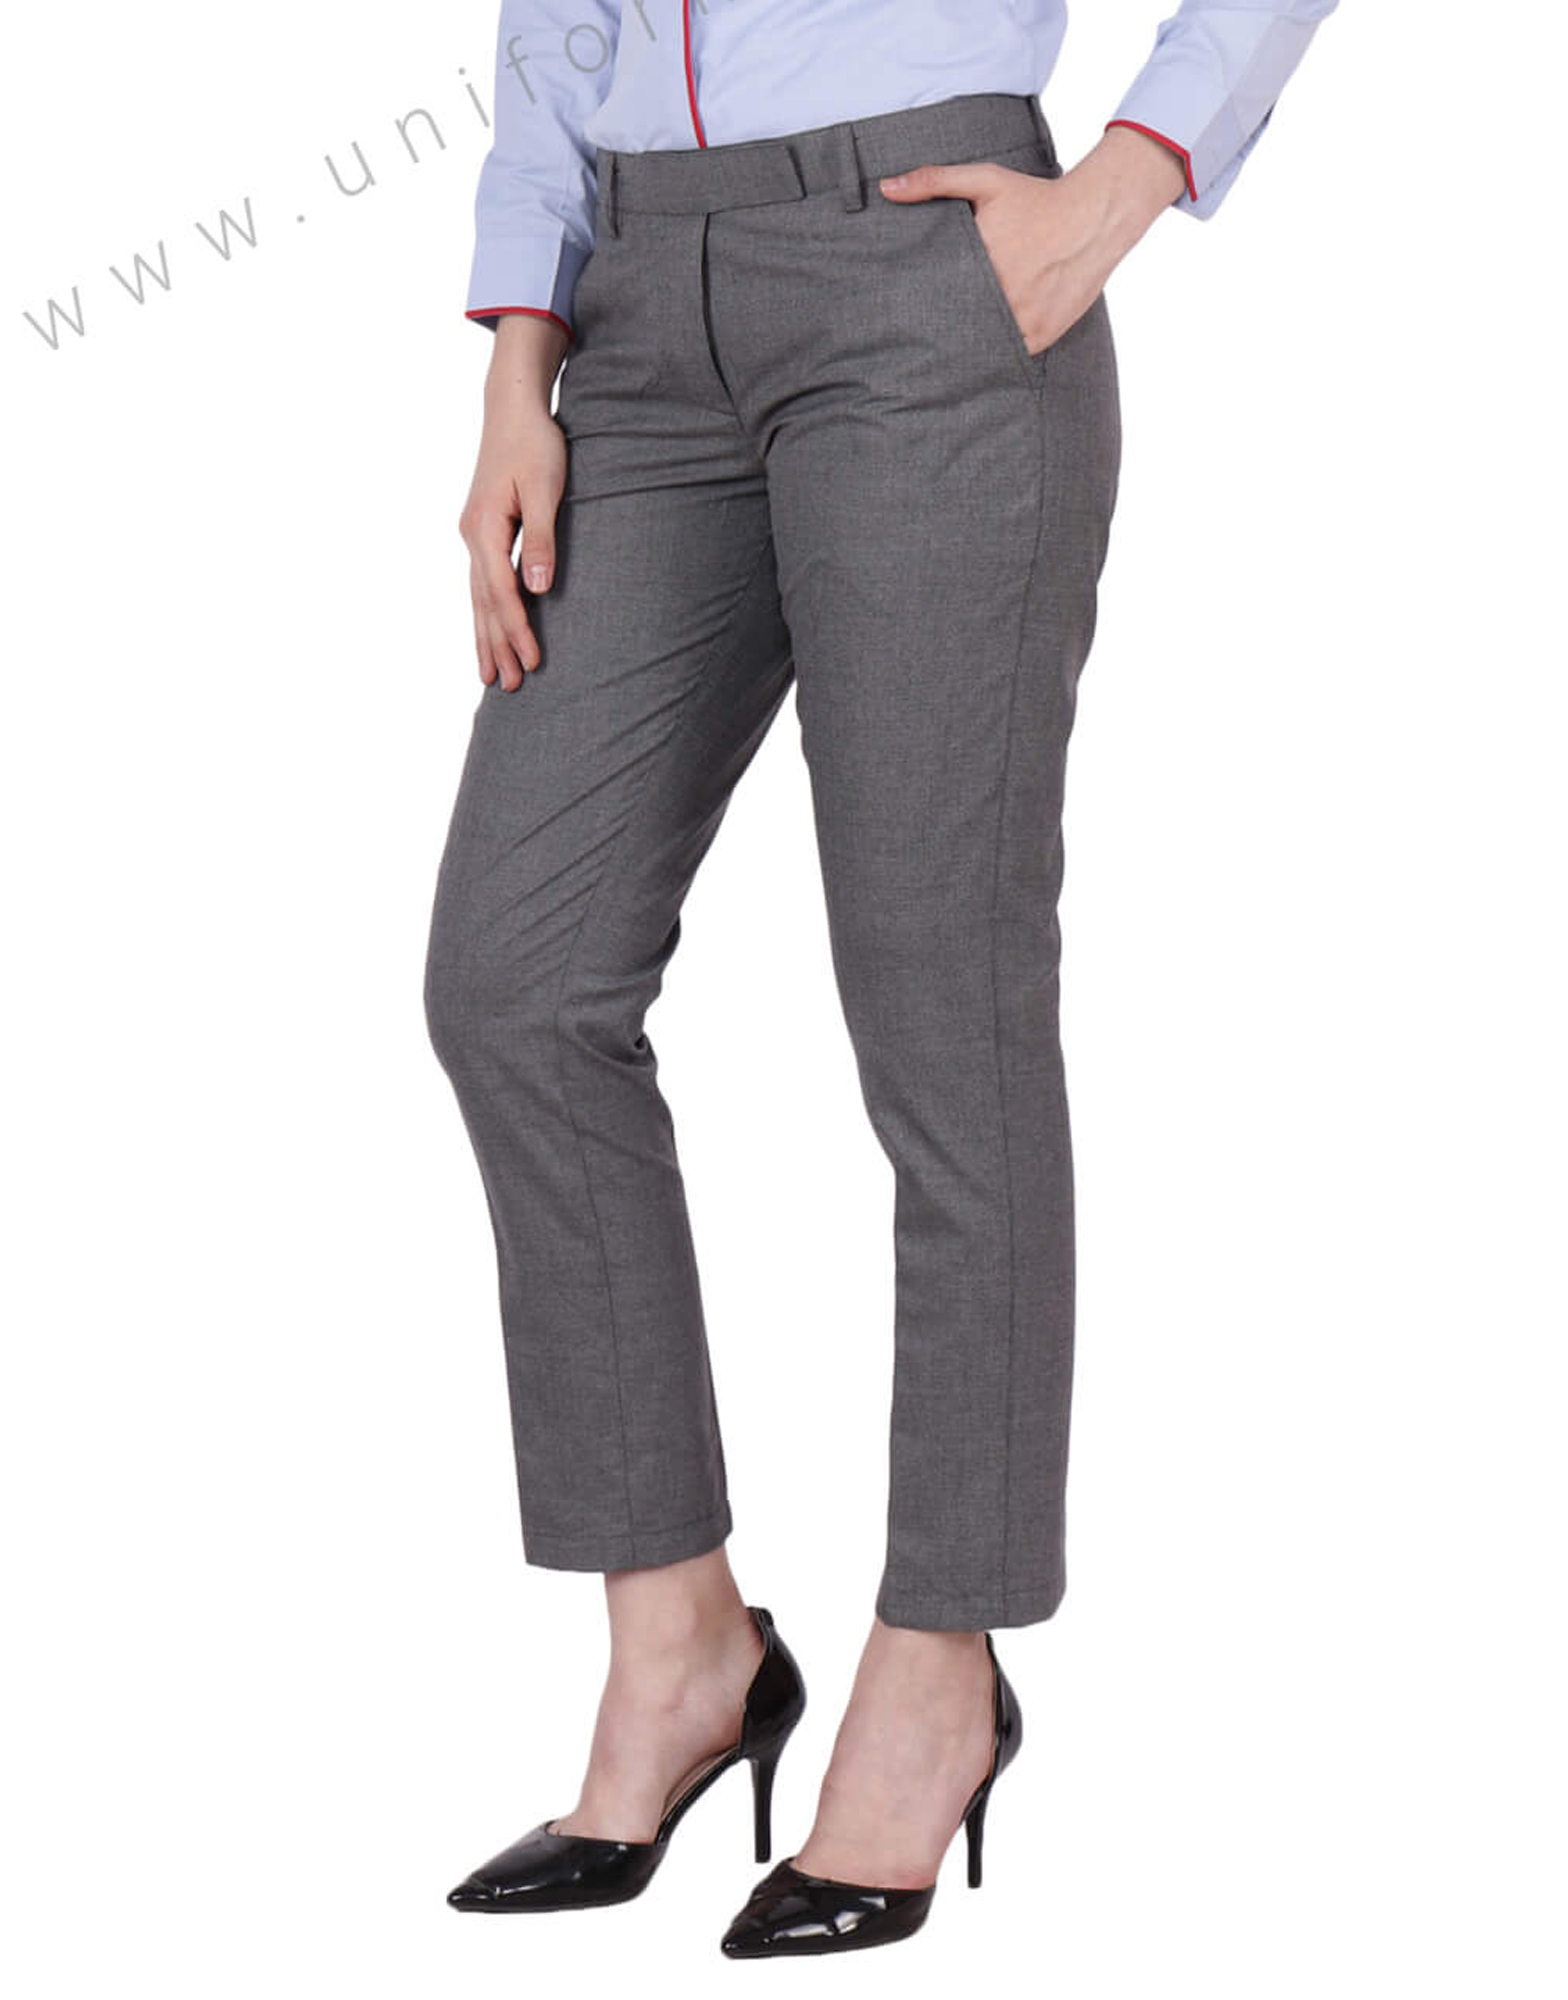 trousers for women, women trousers, trousers for kuties. trouser pants for  women , girls pants, panst for